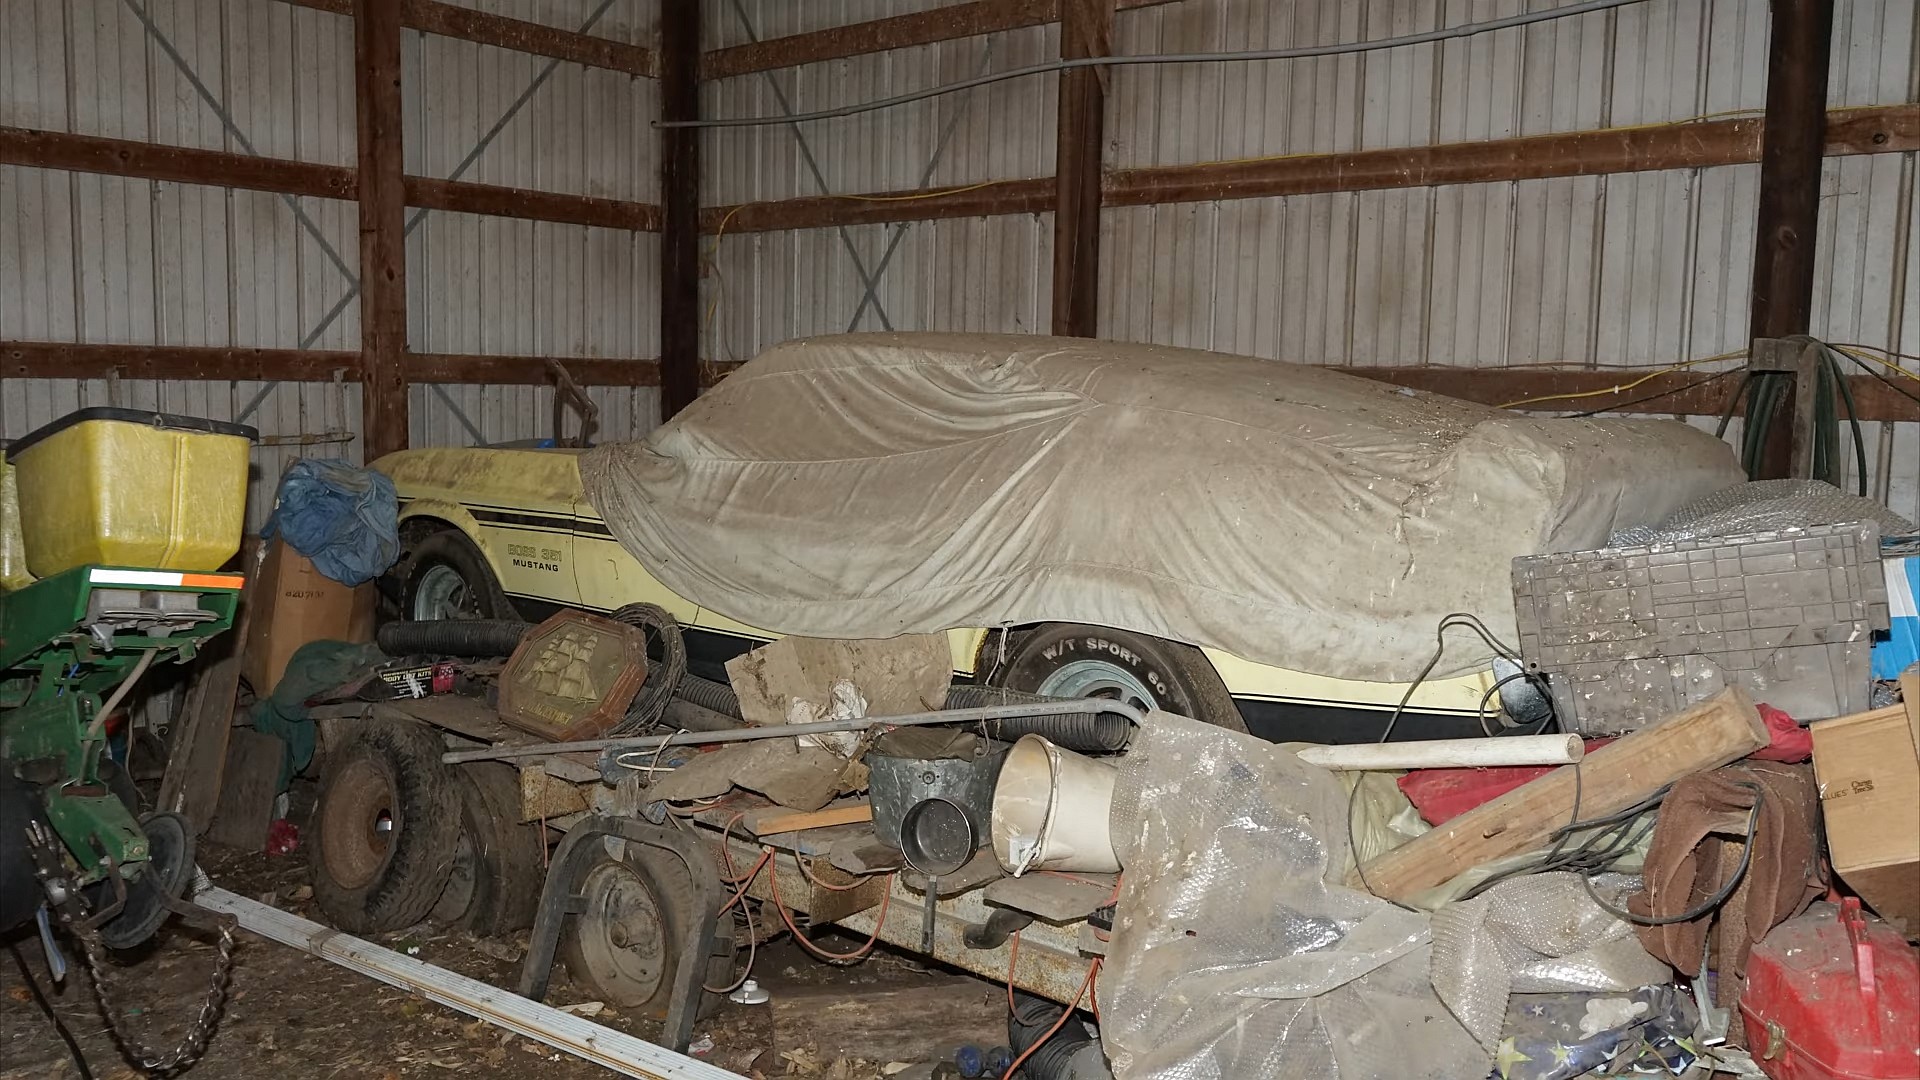 1971 ford mustang boss 351 that spent 46 years in a barn is a rat infested survivor 1